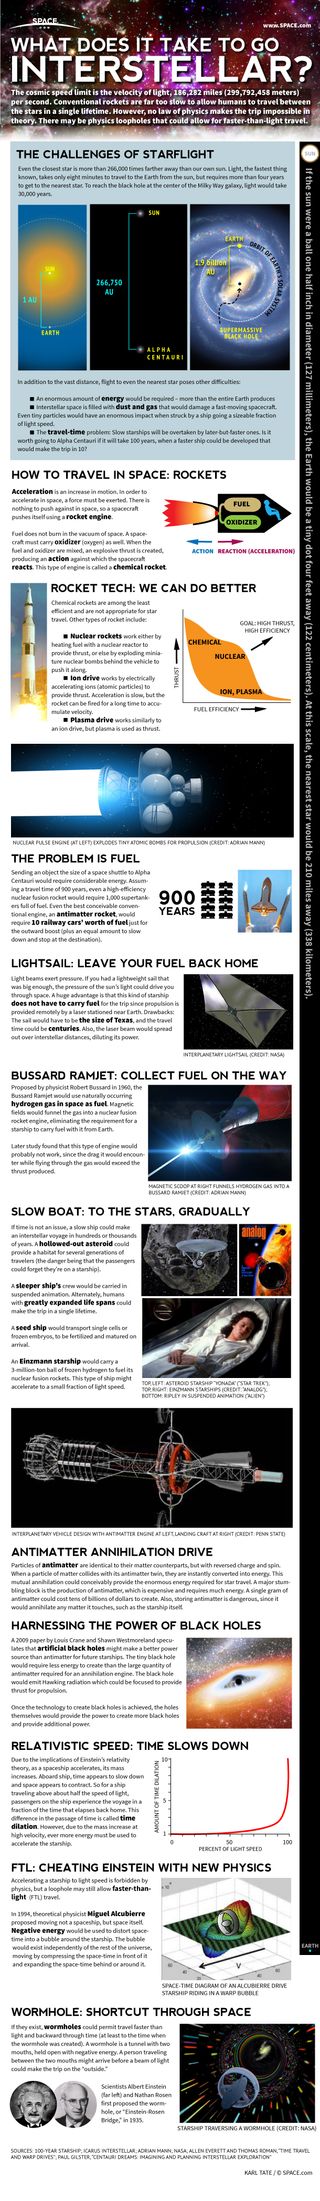 From ramjets to colony ships, see how interstellar spaceflight may work. [See the full SPACE.com Infographic on Interstellar Space Travel]